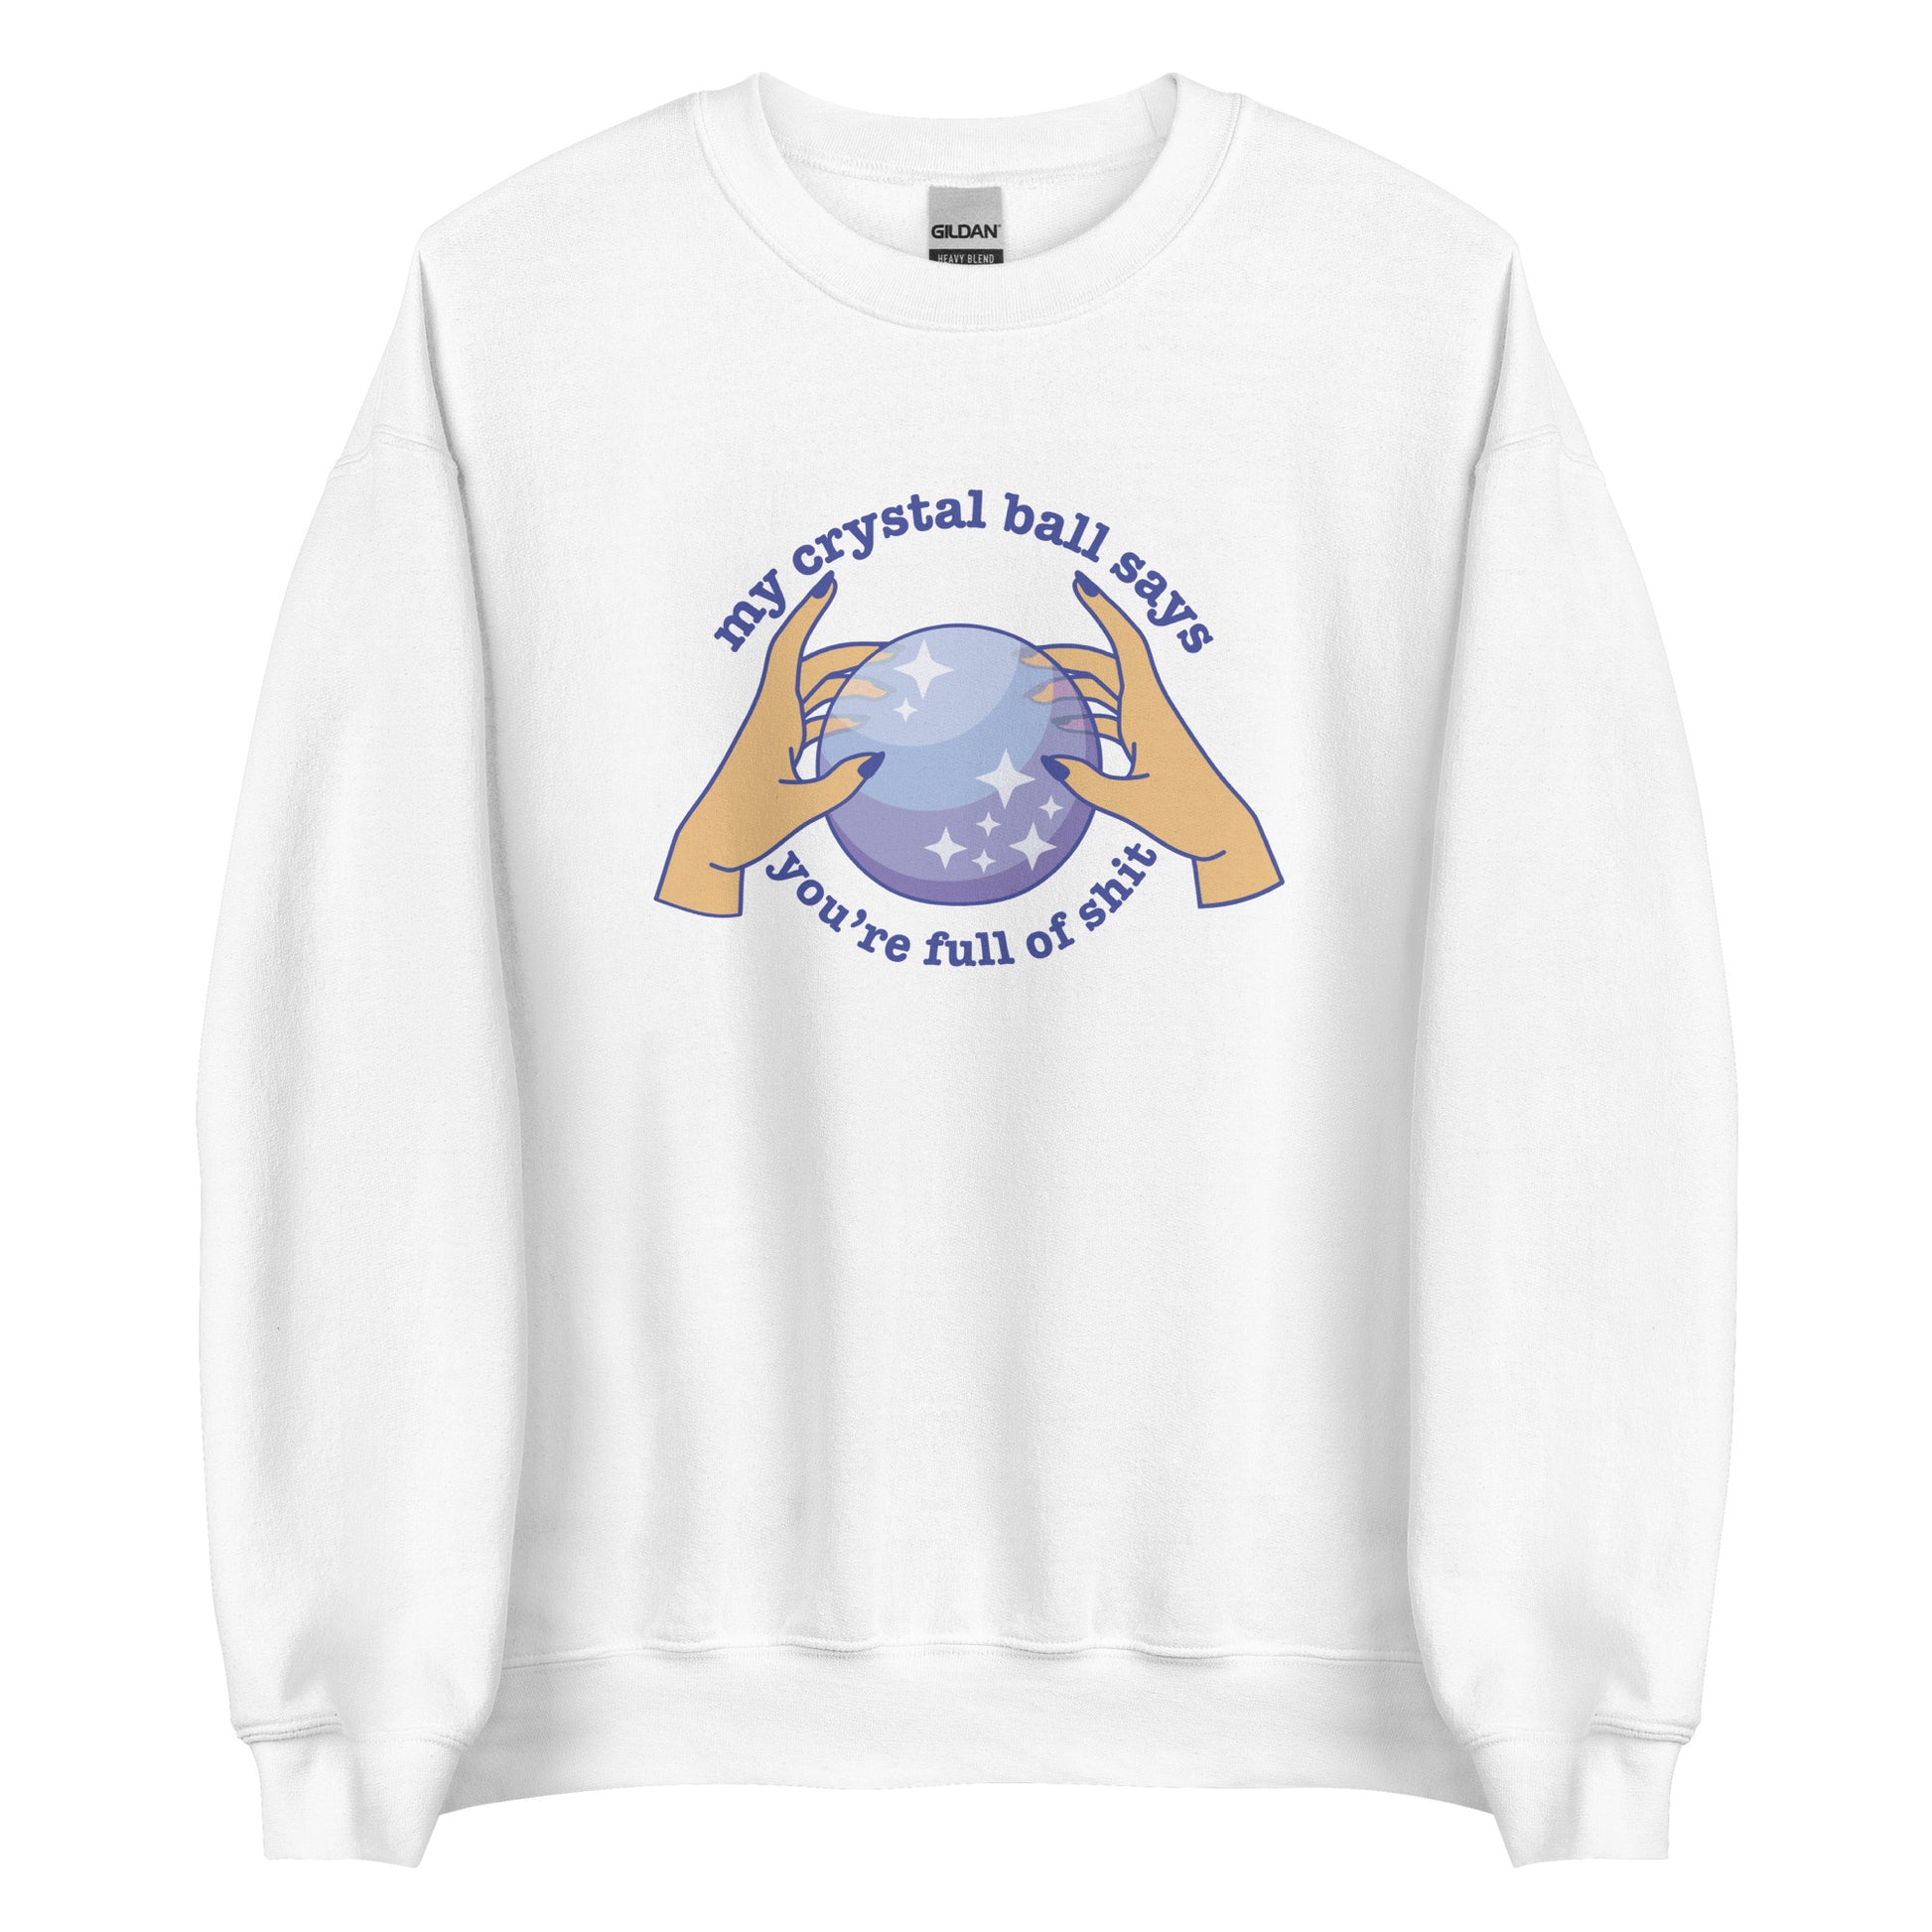 A white blue crewneck sweatshirt with a picture of hands on a crystal ball and text reading "My crystal ball says you're full of shit"